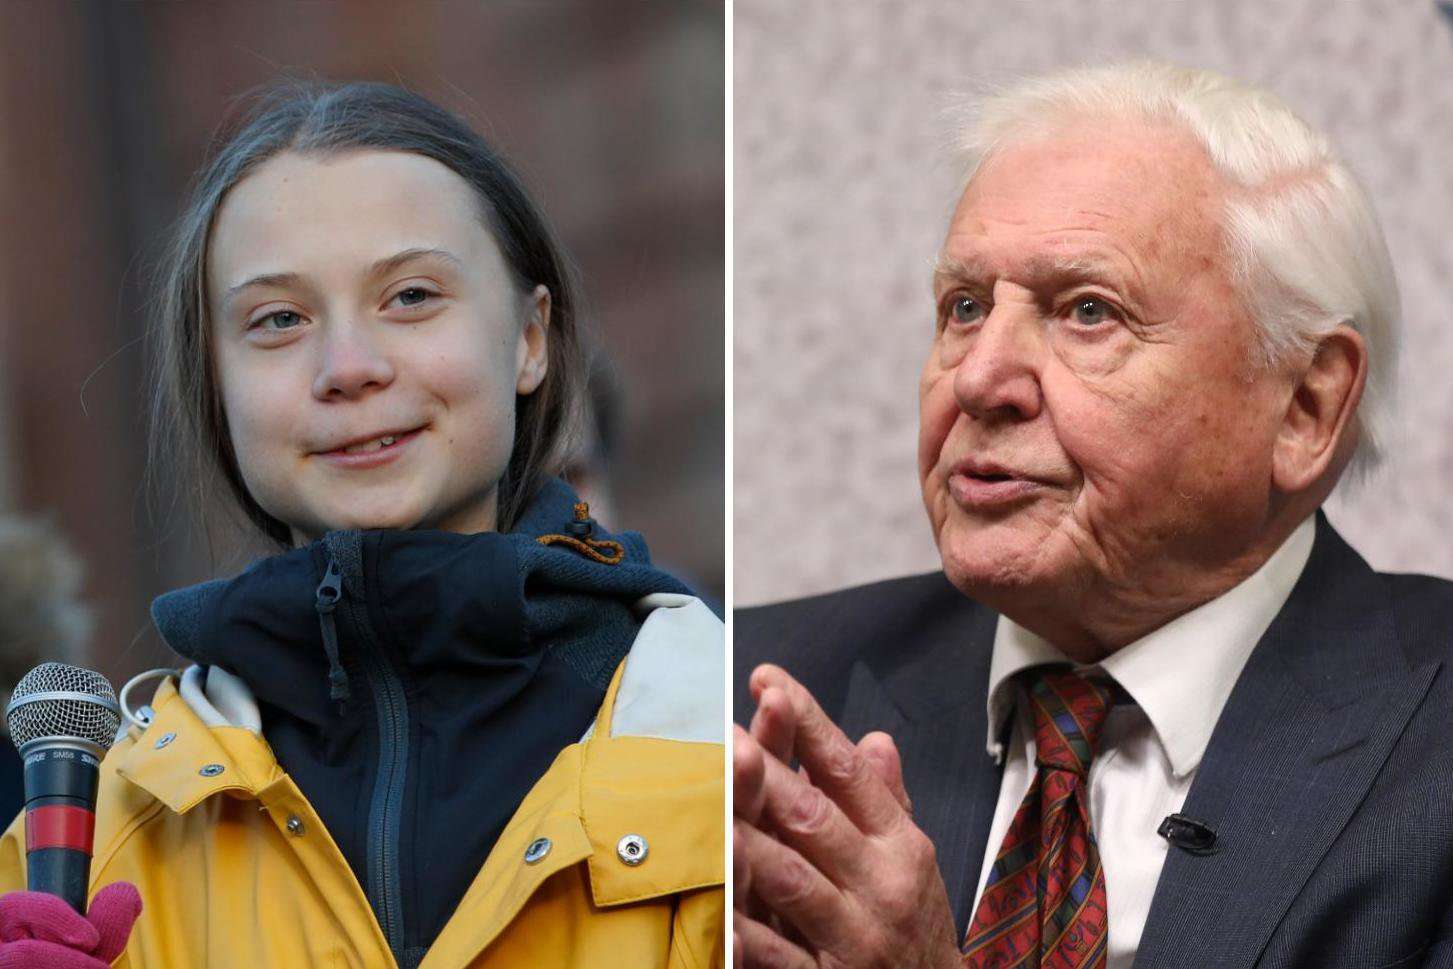 image for Greta Thunberg thanks Sir David Attenborough for inspiring her as they meet for first time over Skype